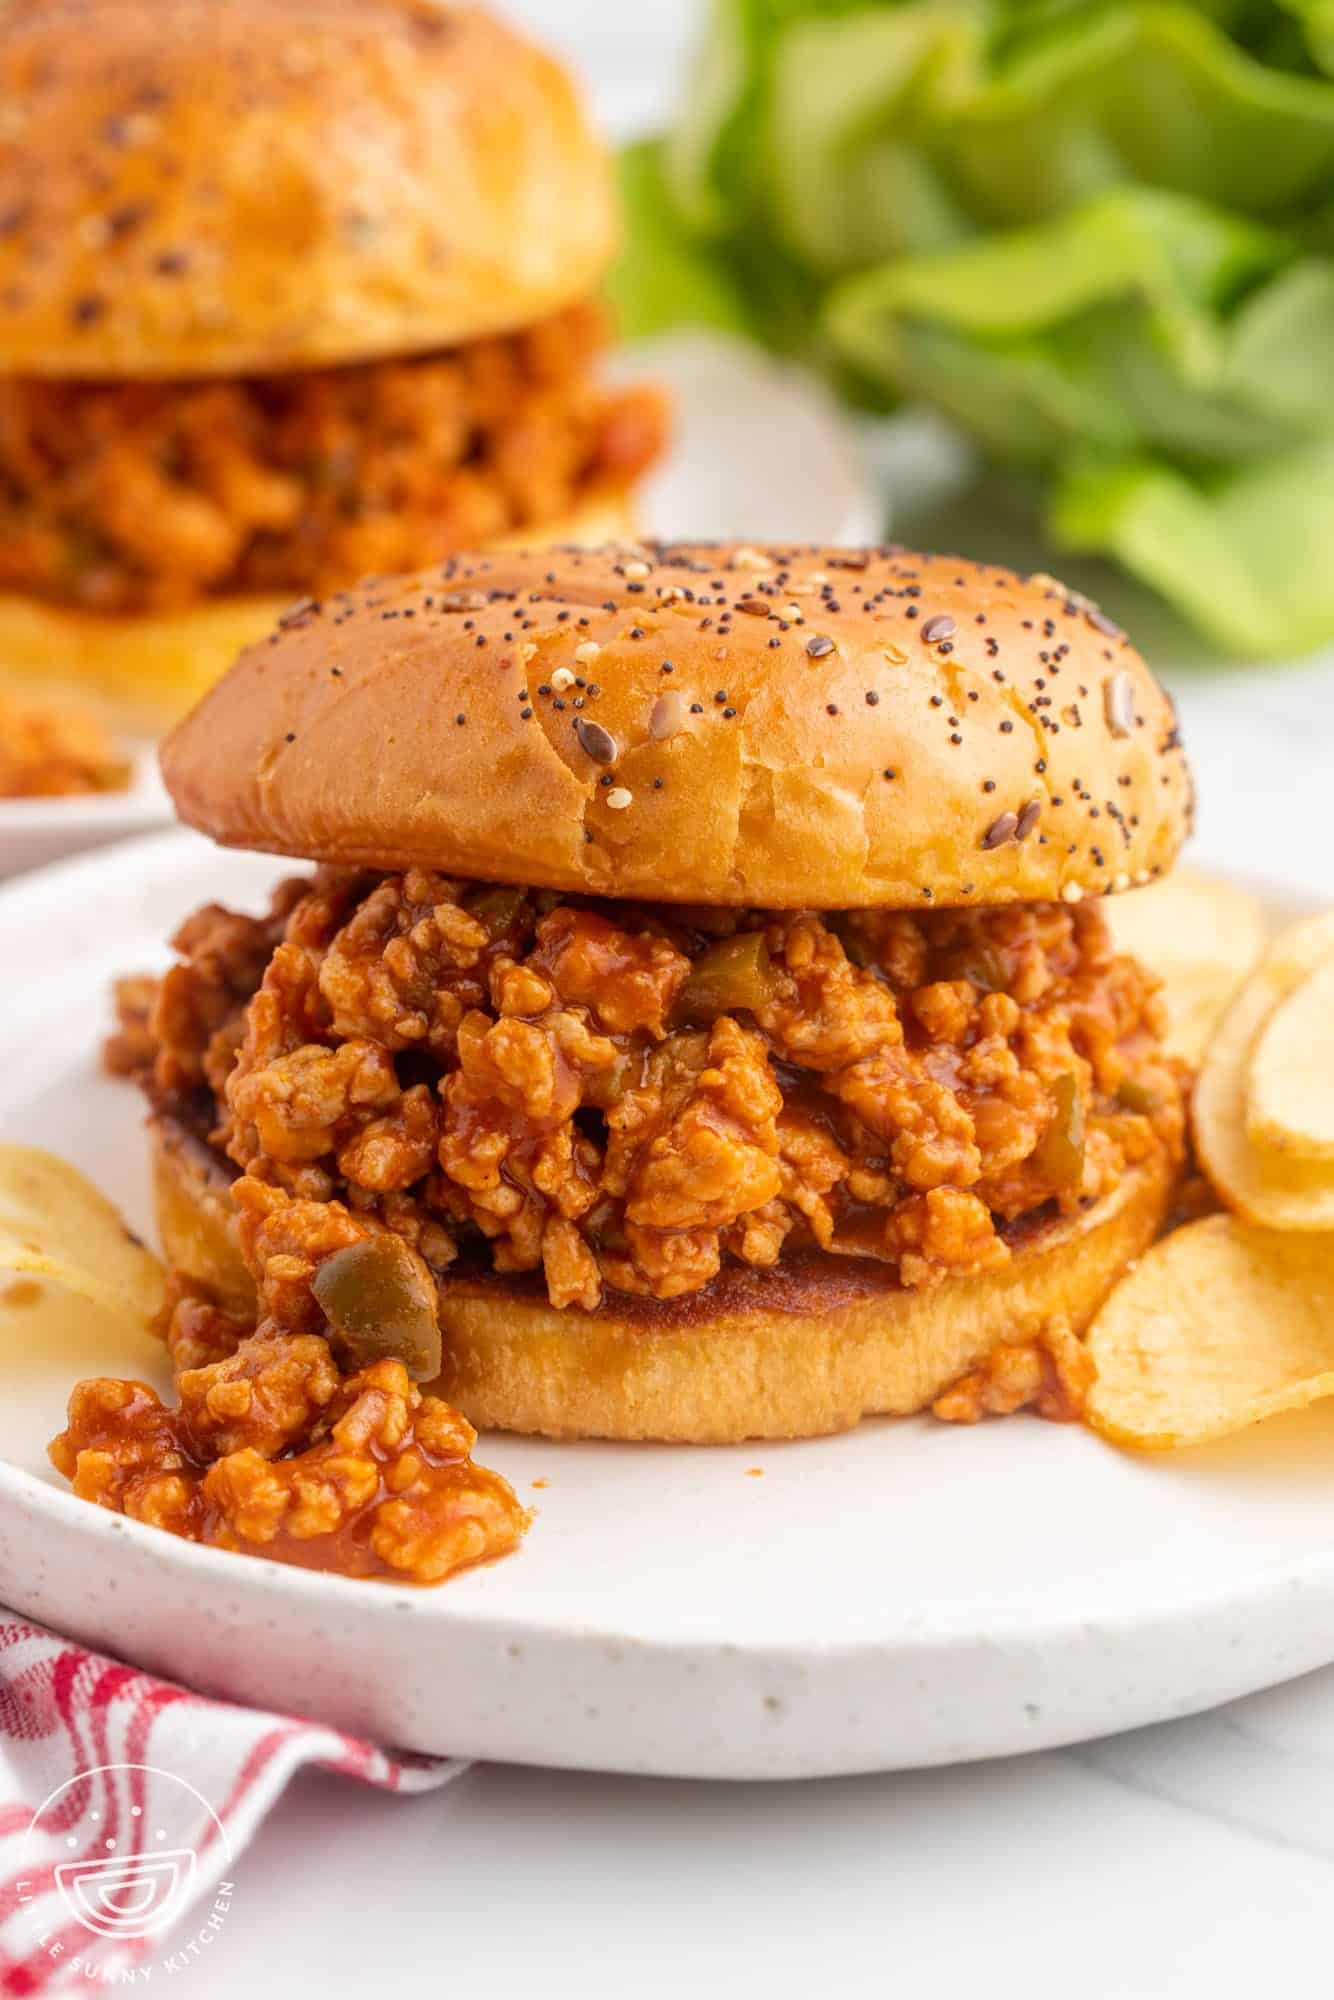 a sloppy joe sandwich made with ground chicken on a seeded bun. The sandwich is on a plate with chips on the side. 